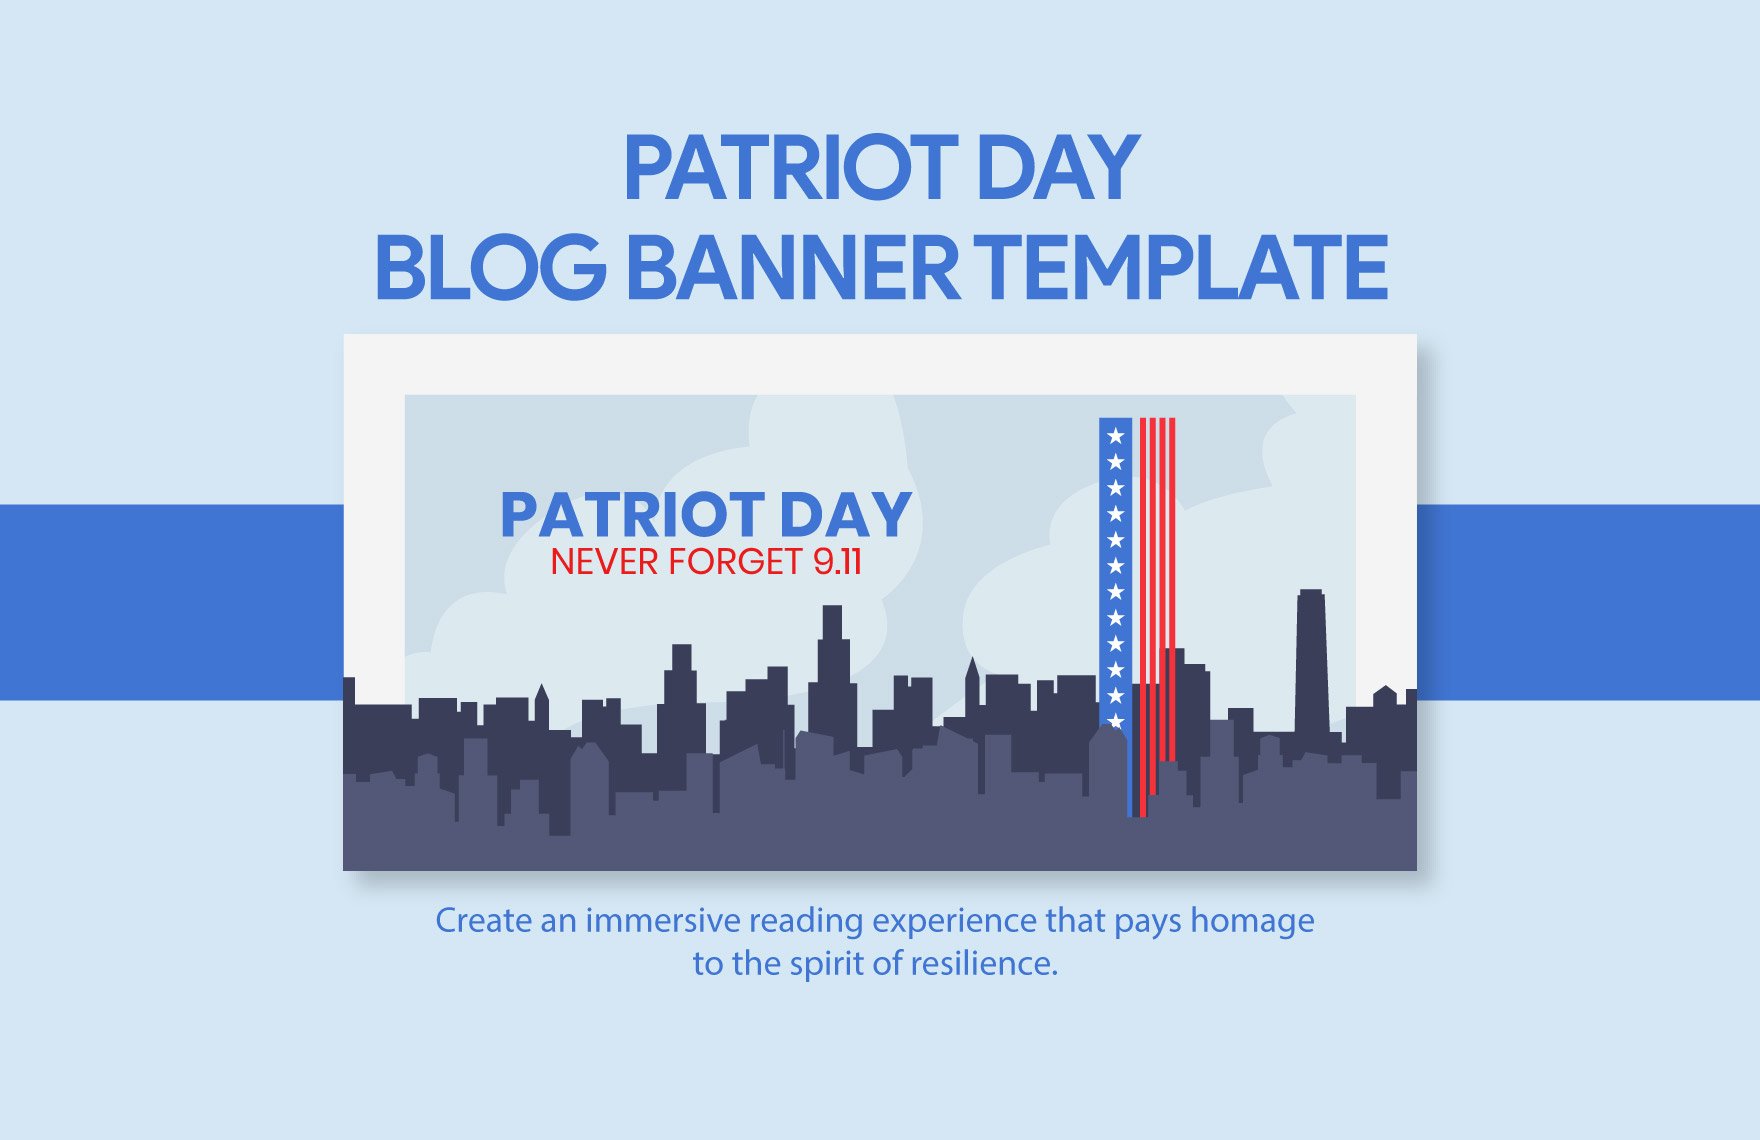 Free Patriot Day Blog Banner Template in Illustrator, PSD, PNG